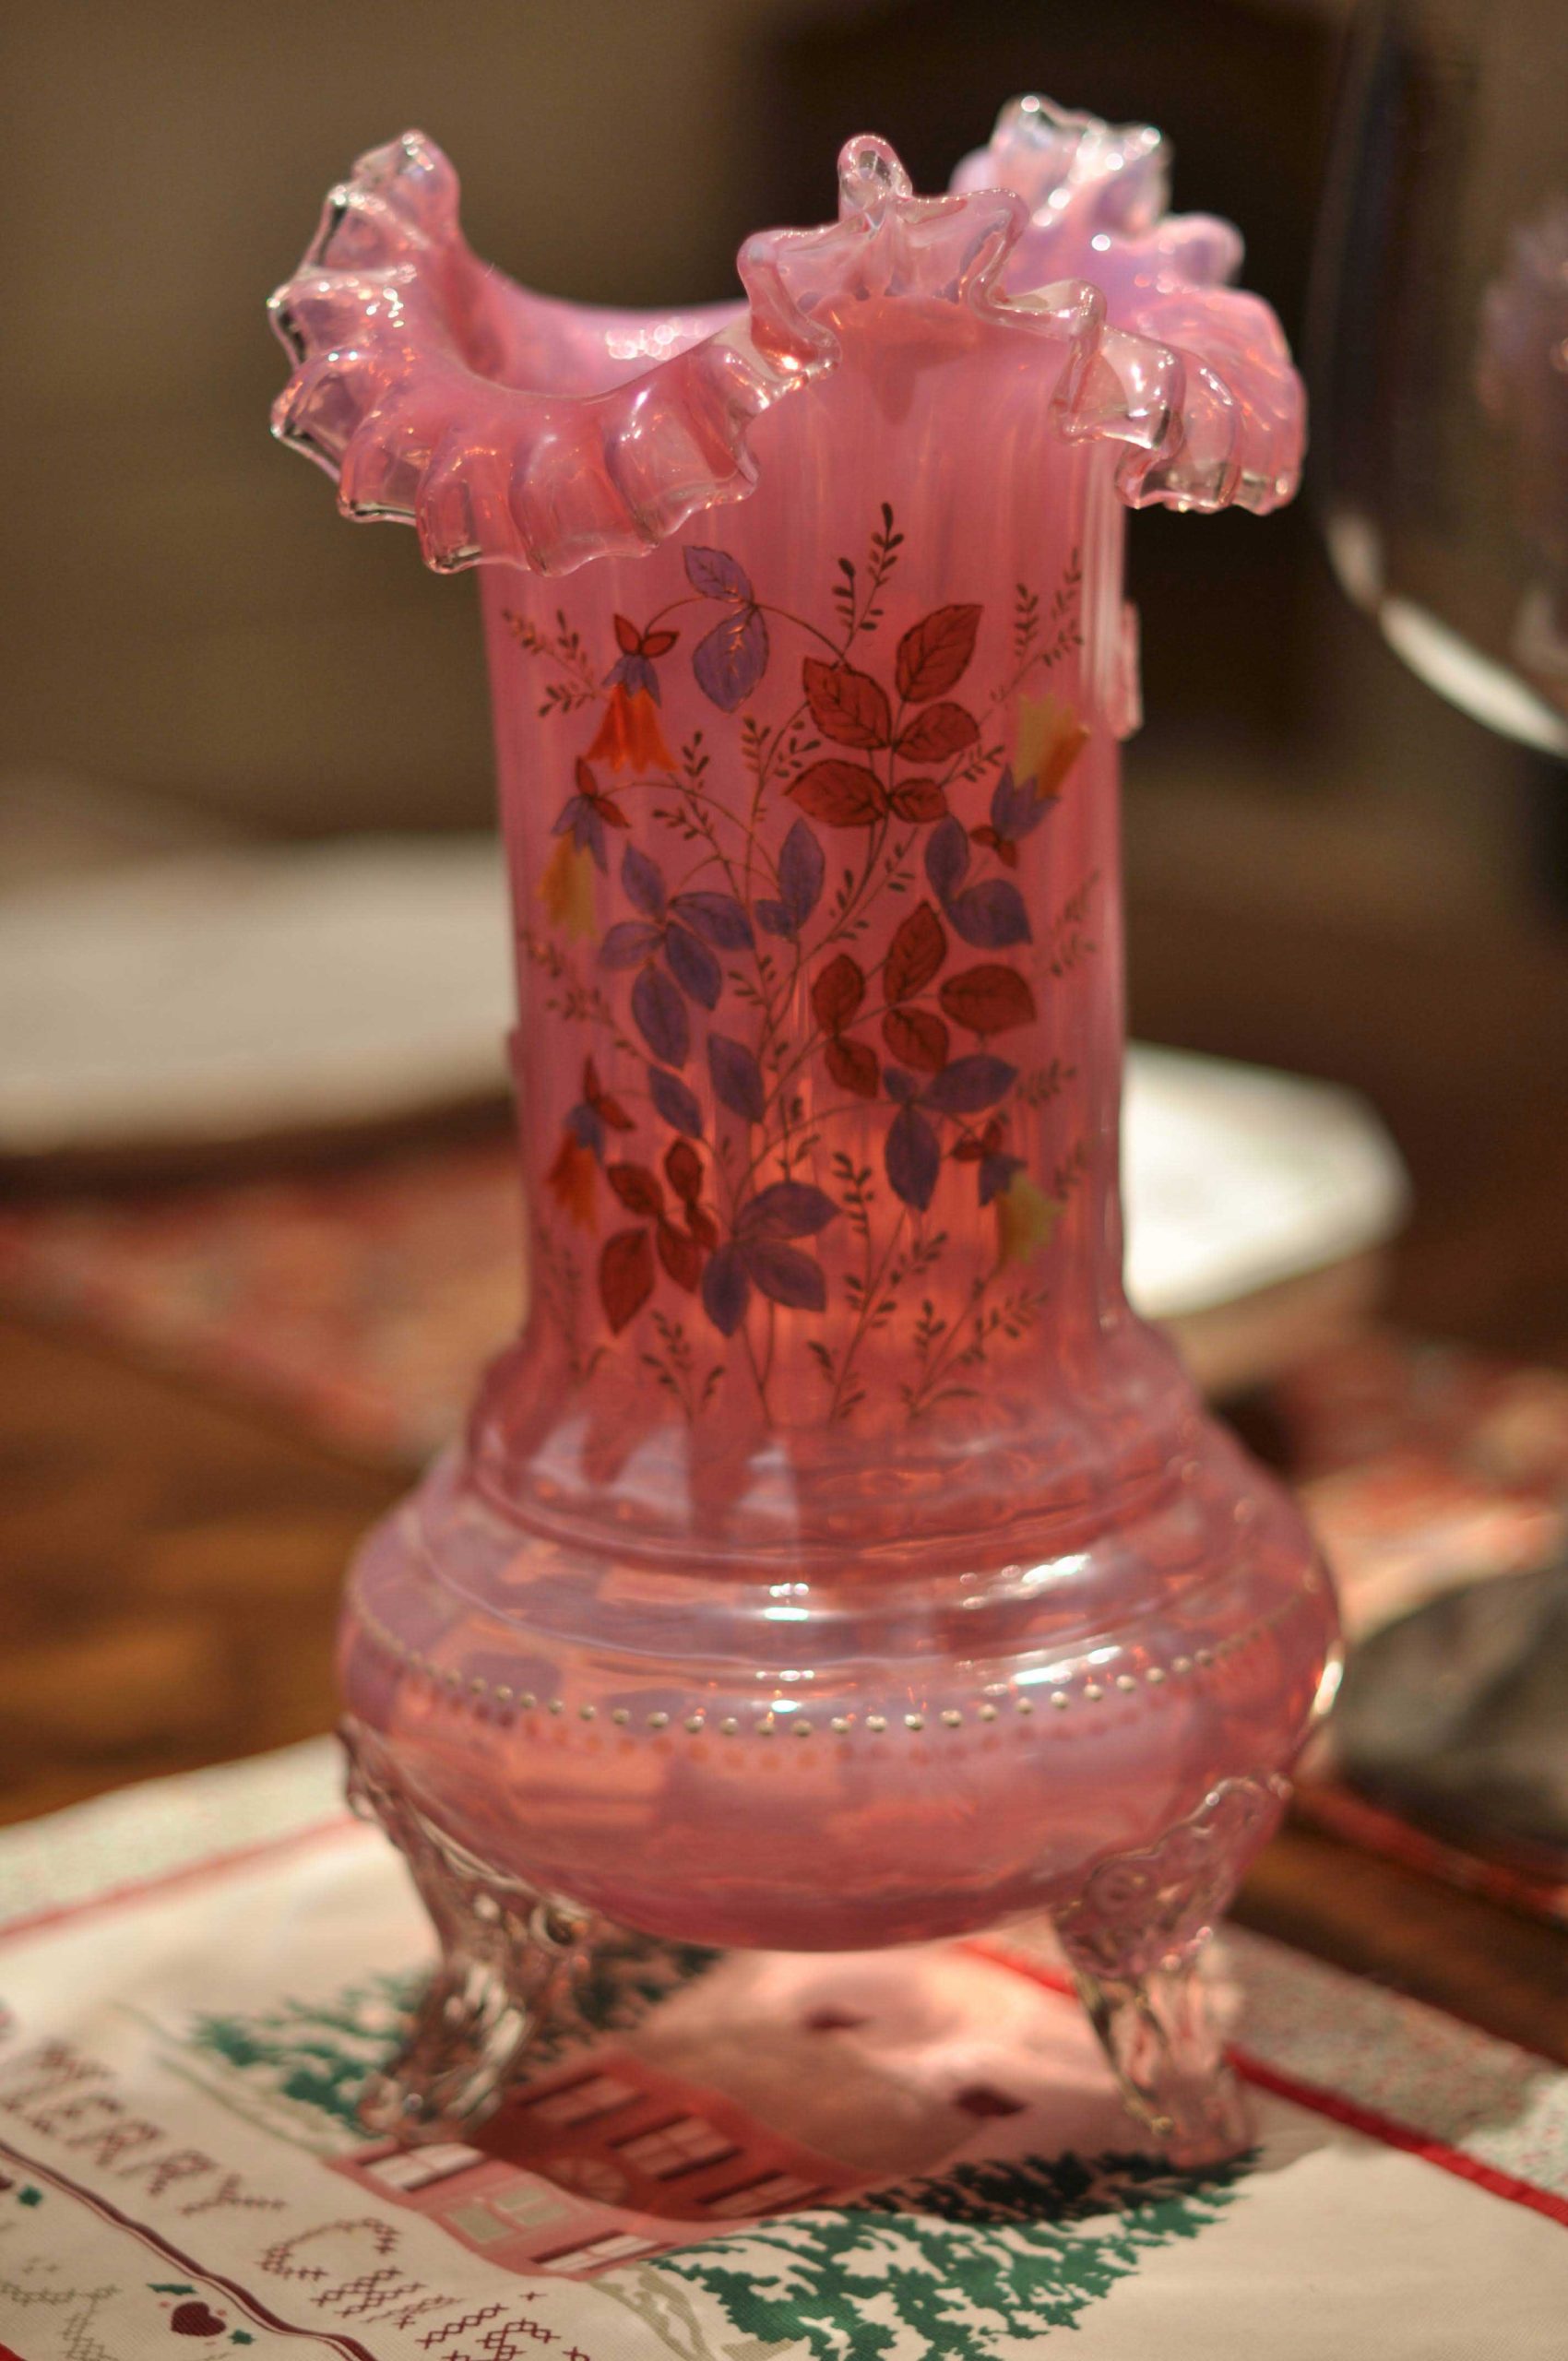 An antique vase crafted from Murano glass